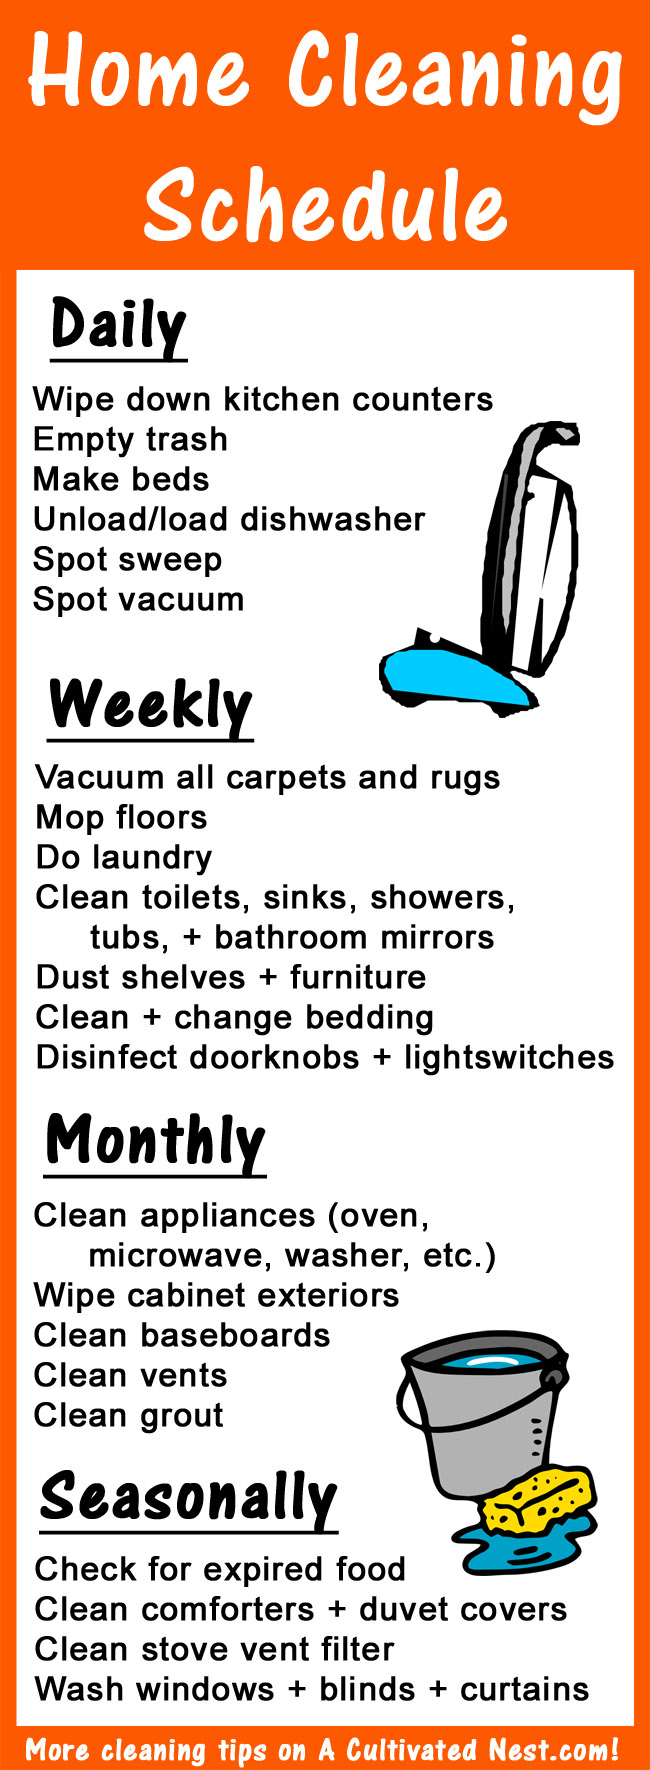 9 Clever Tips for Keeping Your House Clean in Minutes a Day- Use this home cleaning schedule infographic to break up your cleaning into manageable parts! More tips on A Cultivated Nest!